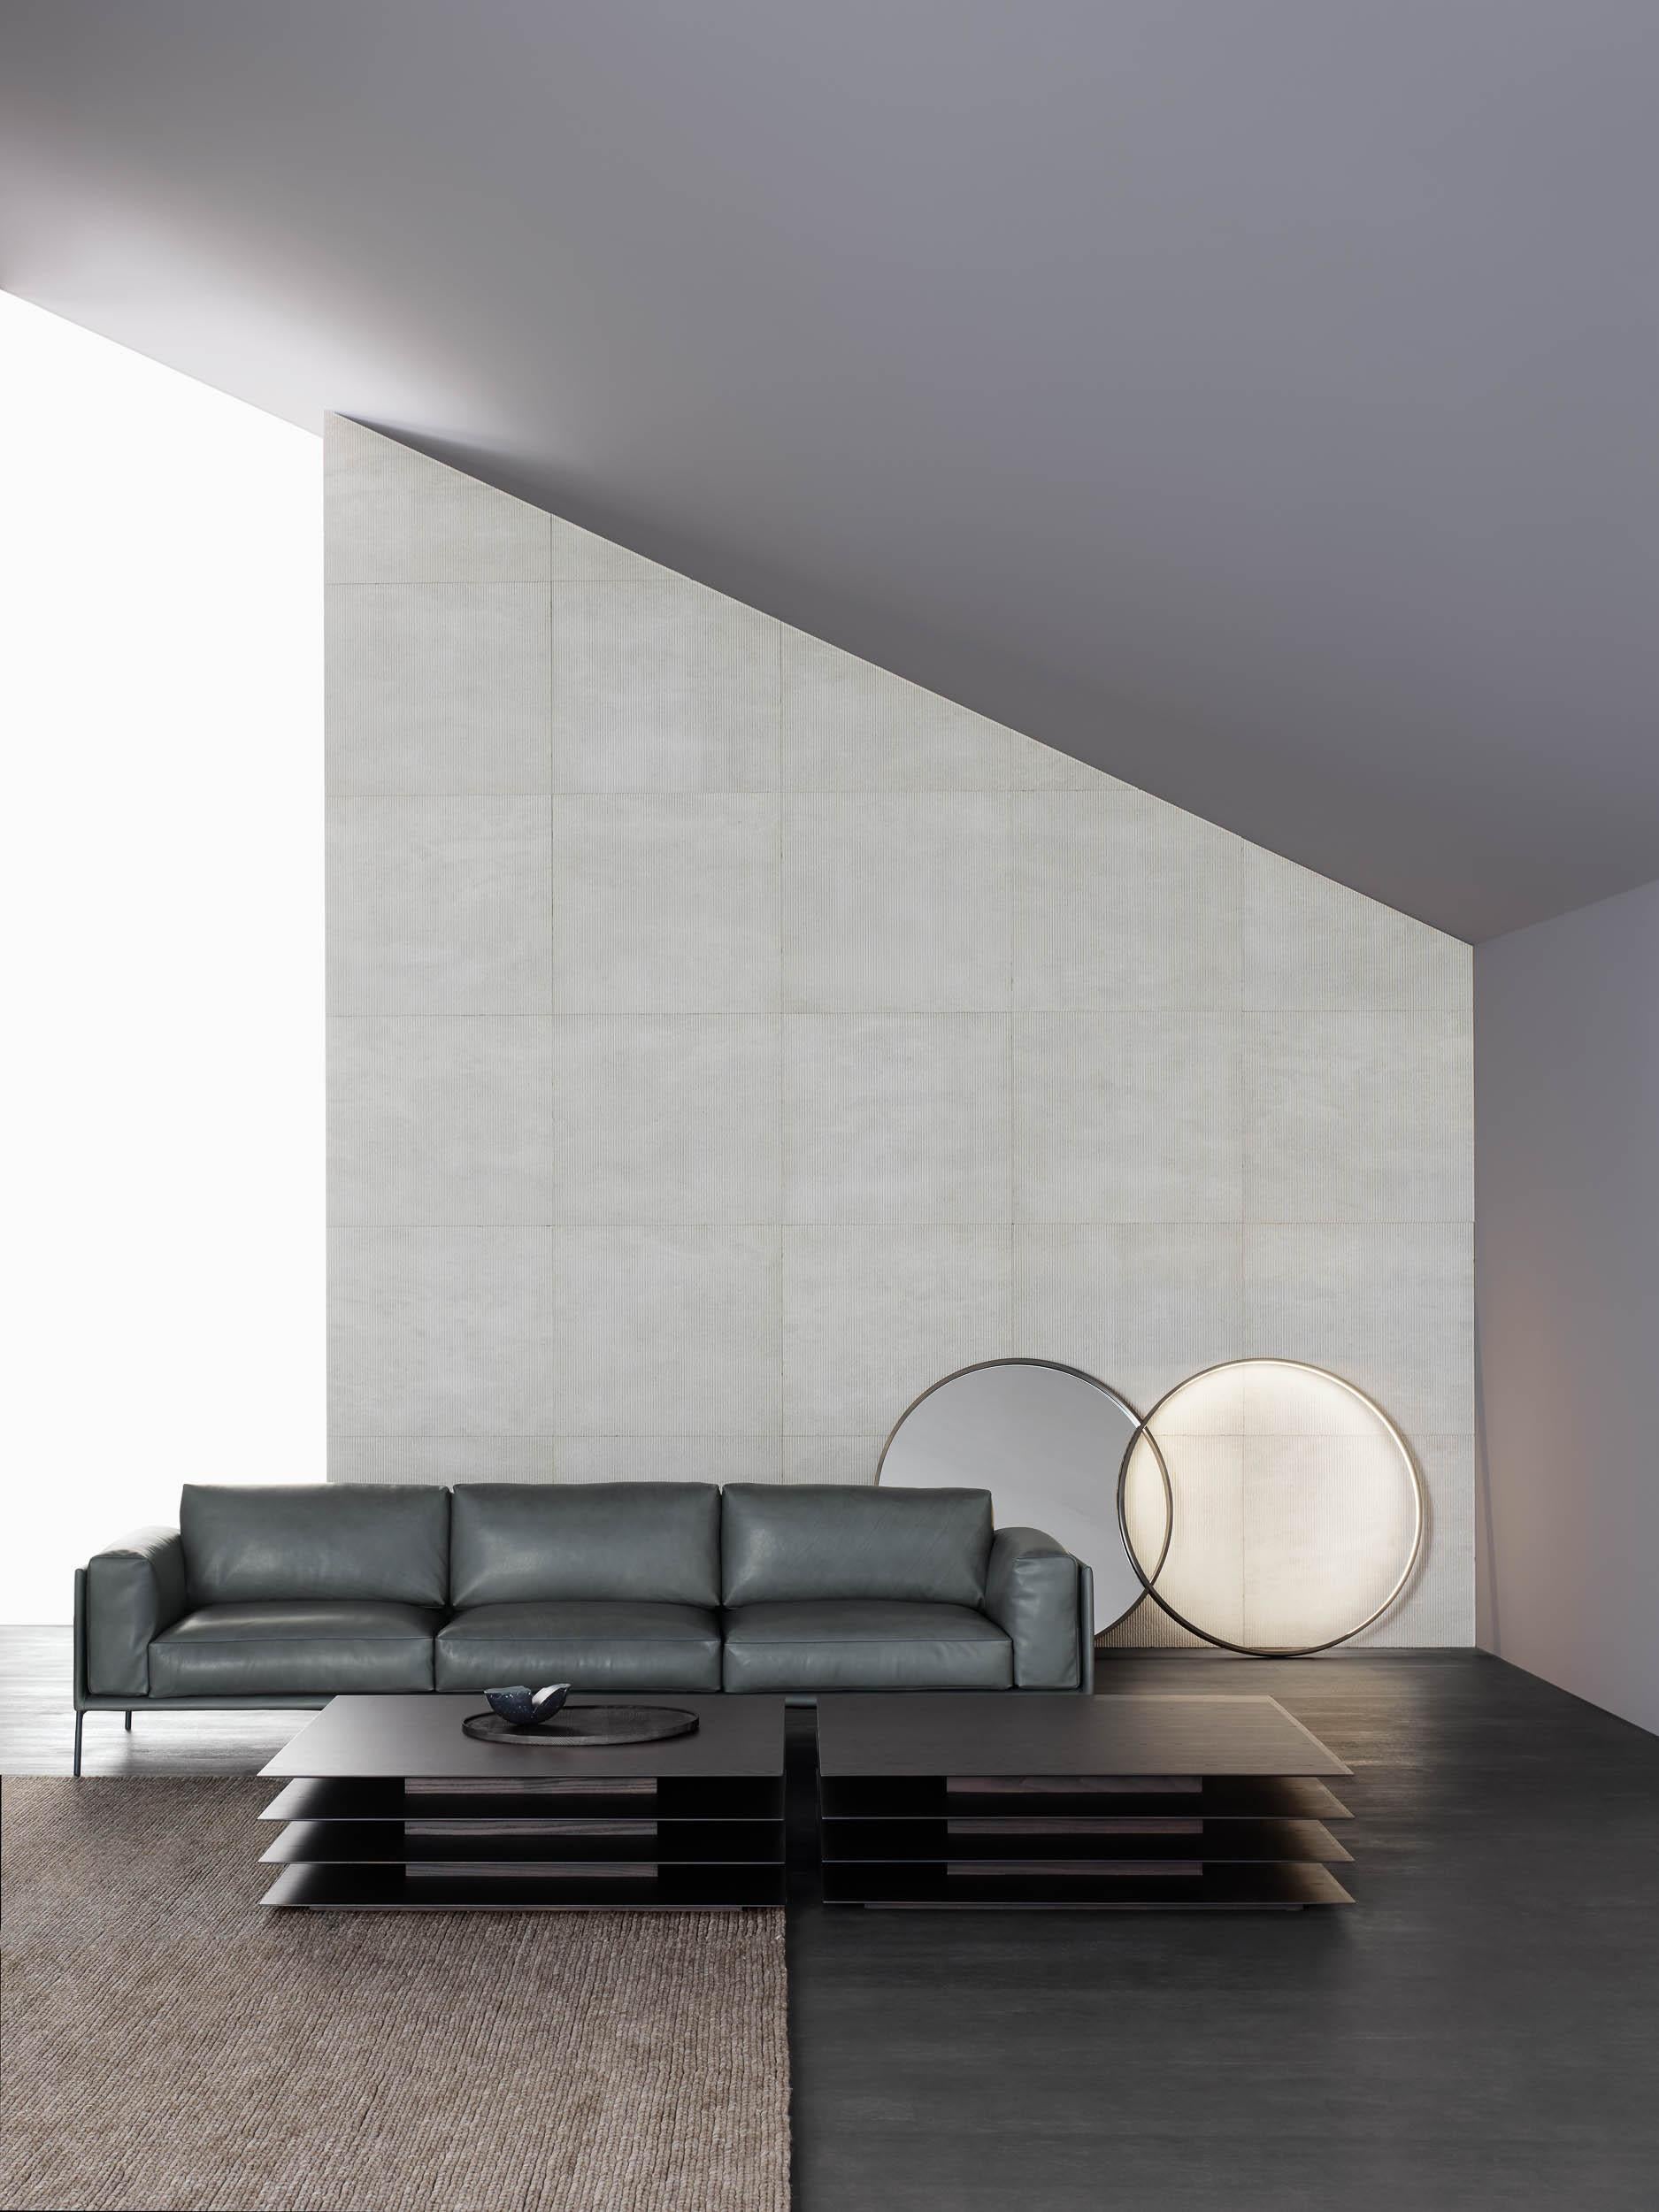 Sofa Giorgio by Amura Lab 
Designer: Emanuel Gargano

Configuration: 421P
Model shown: Leather - Daino 04

“Perfect synthesis of form and function, comfort” A rigid and regular shell, welcomes soft and enveloping seats and backs. Giorgio has the